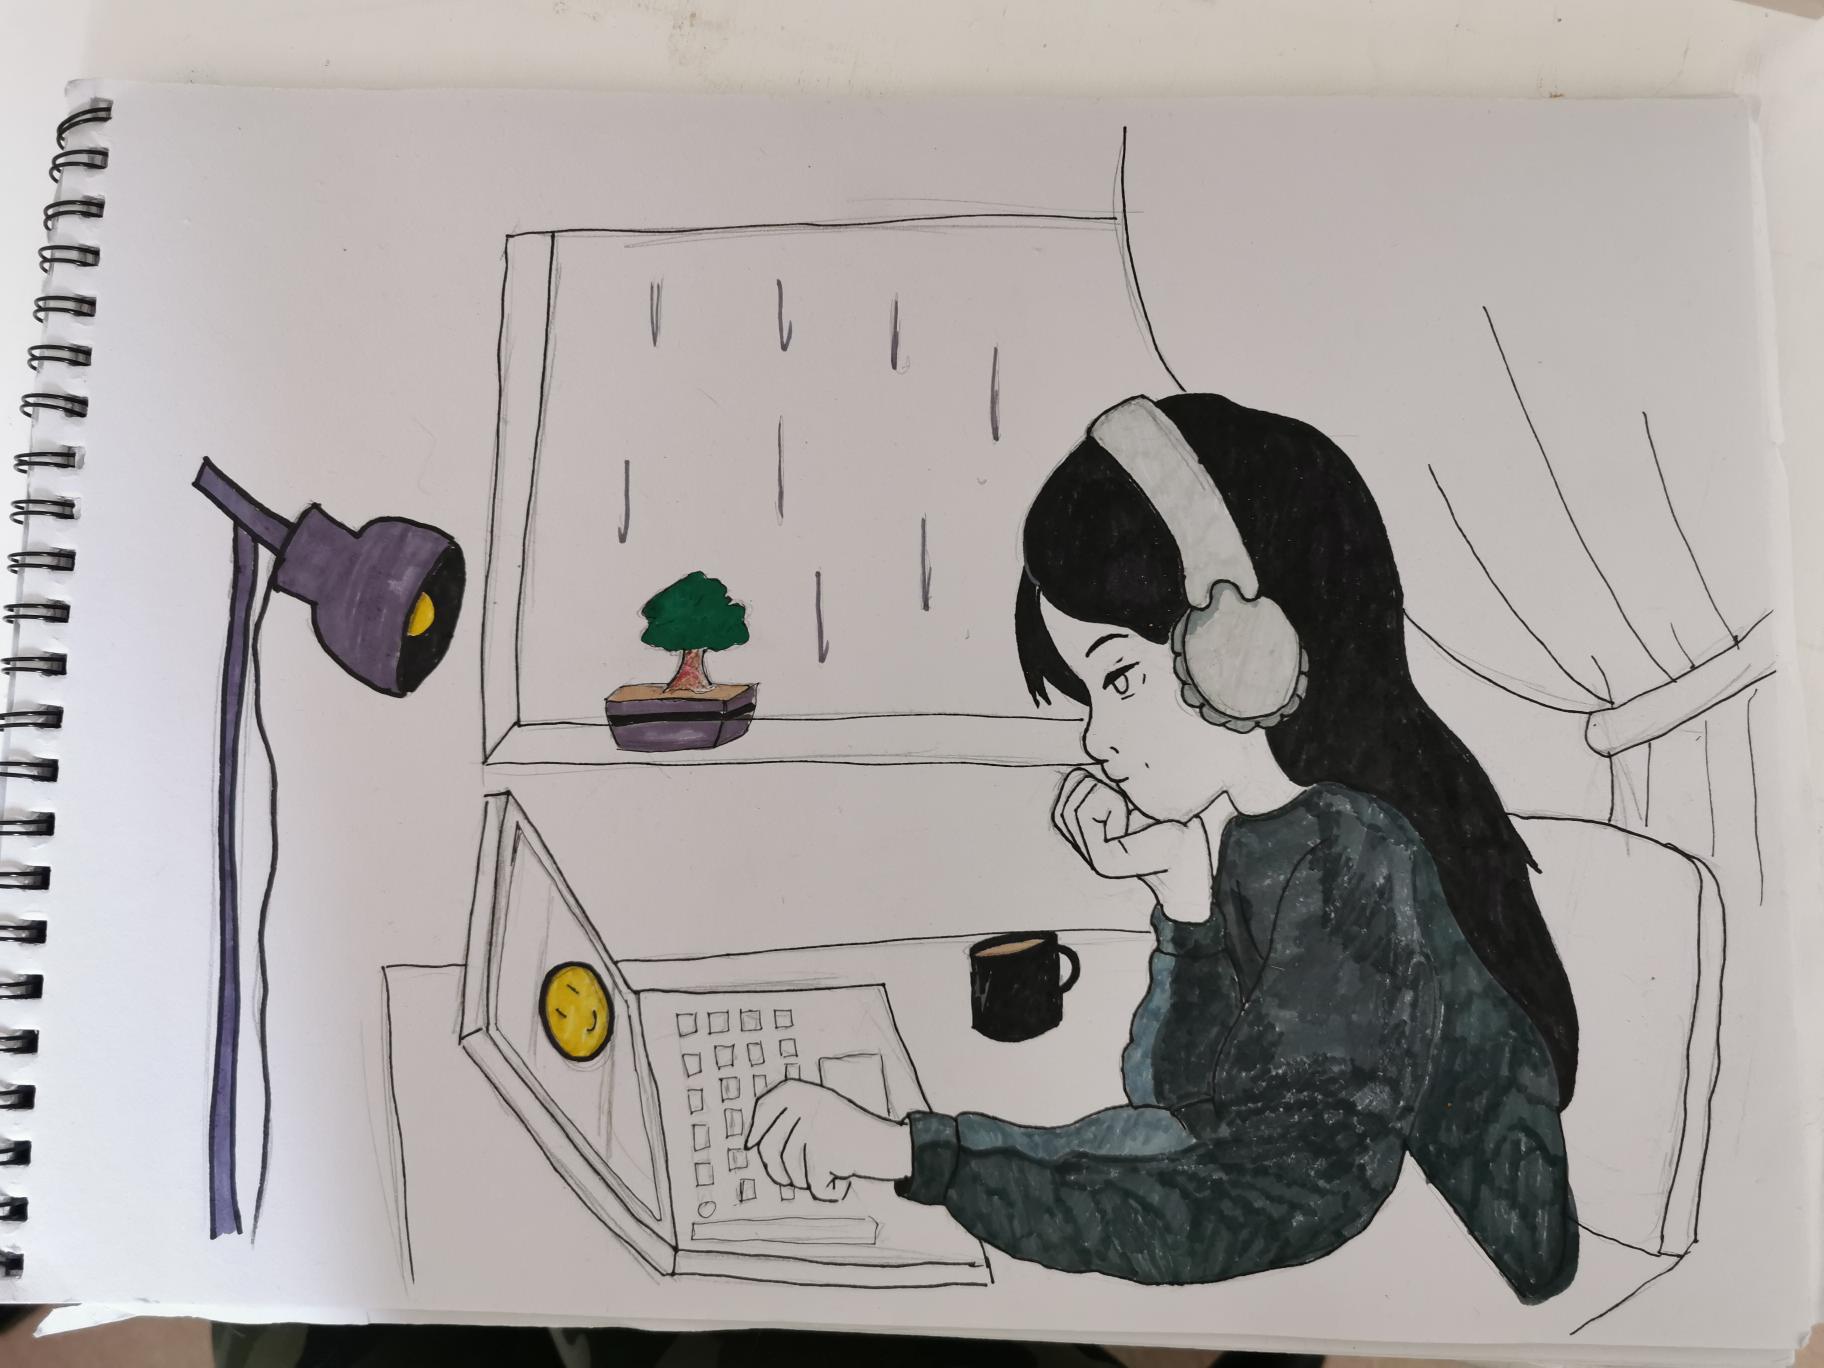 An illustration of a girl with long dark hair sitting at a desk working on a laptop. She has a bonsai tree on the windowsill and a lamp pointing at her desk. There is a cup of coffee next to her. 